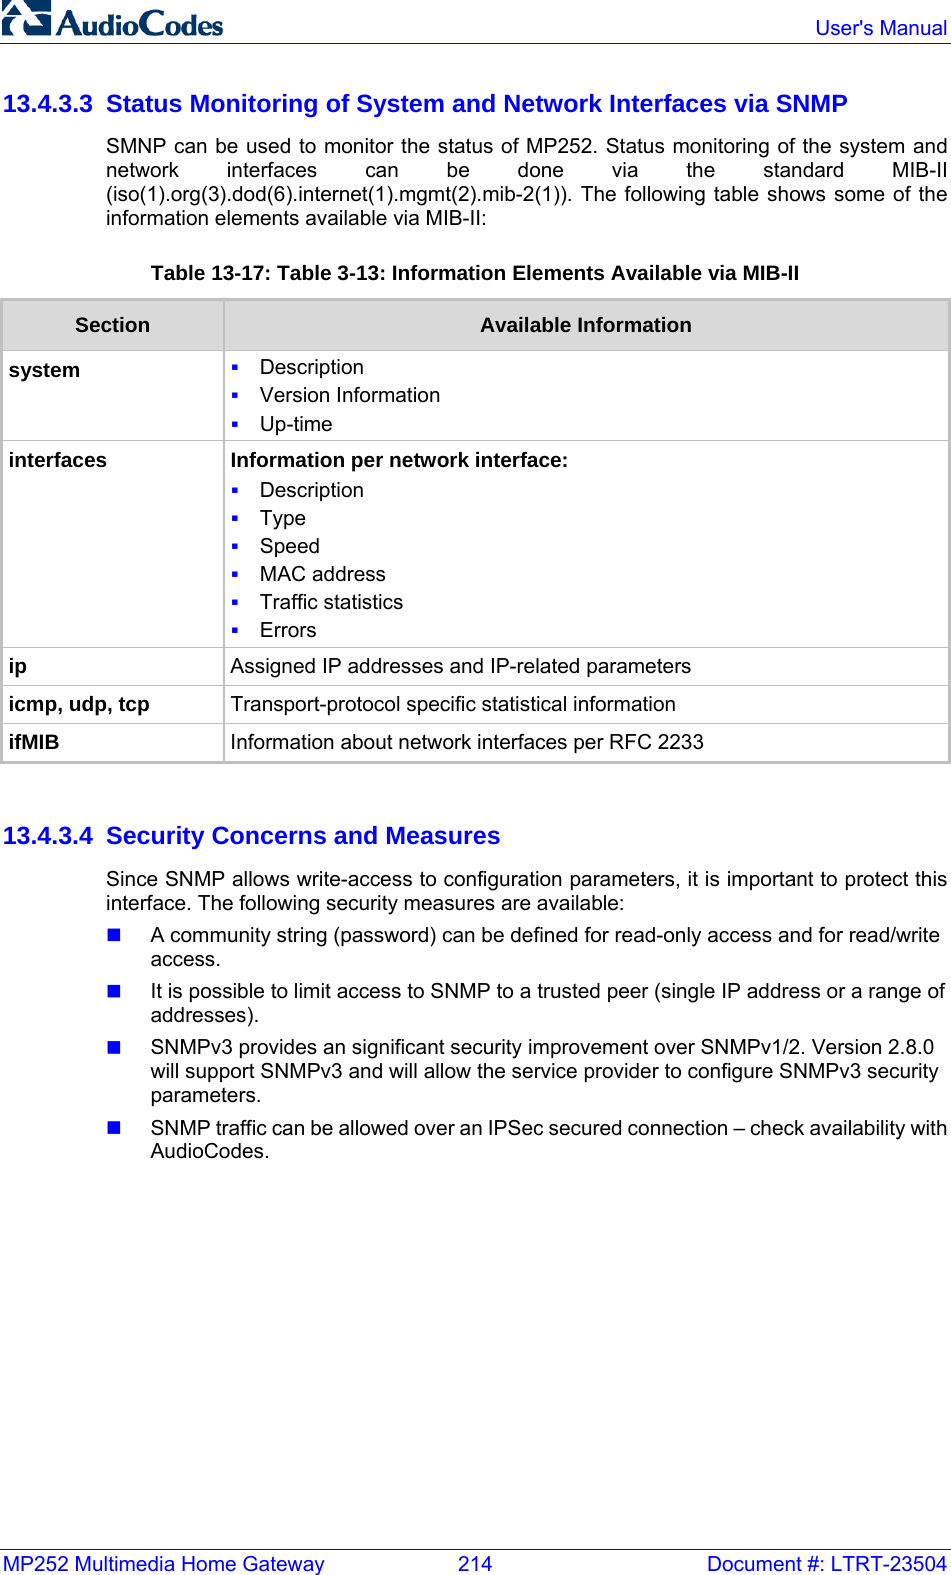 MP252 Multimedia Home Gateway  214  Document #: LTRT-23504  User&apos;s Manual  13.4.3.3  Status Monitoring of System and Network Interfaces via SNMP SMNP can be used to monitor the status of MP252. Status monitoring of the system and network interfaces can be done via the standard MIB-II (iso(1).org(3).dod(6).internet(1).mgmt(2).mib-2(1)). The following table shows some of the information elements available via MIB-II: Table 13-17: Table  3-13: Information Elements Available via MIB-II Section  Available Information system  Description  Version Information  Up-time interfaces Information per network interface:  Description  Type  Speed  MAC address  Traffic statistics  Errors ip Assigned IP addresses and IP-related parameters icmp, udp, tcp Transport-protocol specific statistical information ifMIB Information about network interfaces per RFC 2233   13.4.3.4  Security Concerns and Measures Since SNMP allows write-access to configuration parameters, it is important to protect this interface. The following security measures are available:  A community string (password) can be defined for read-only access and for read/write access.  It is possible to limit access to SNMP to a trusted peer (single IP address or a range of addresses).  SNMPv3 provides an significant security improvement over SNMPv1/2. Version 2.8.0 will support SNMPv3 and will allow the service provider to configure SNMPv3 security parameters.  SNMP traffic can be allowed over an IPSec secured connection – check availability with AudioCodes. 